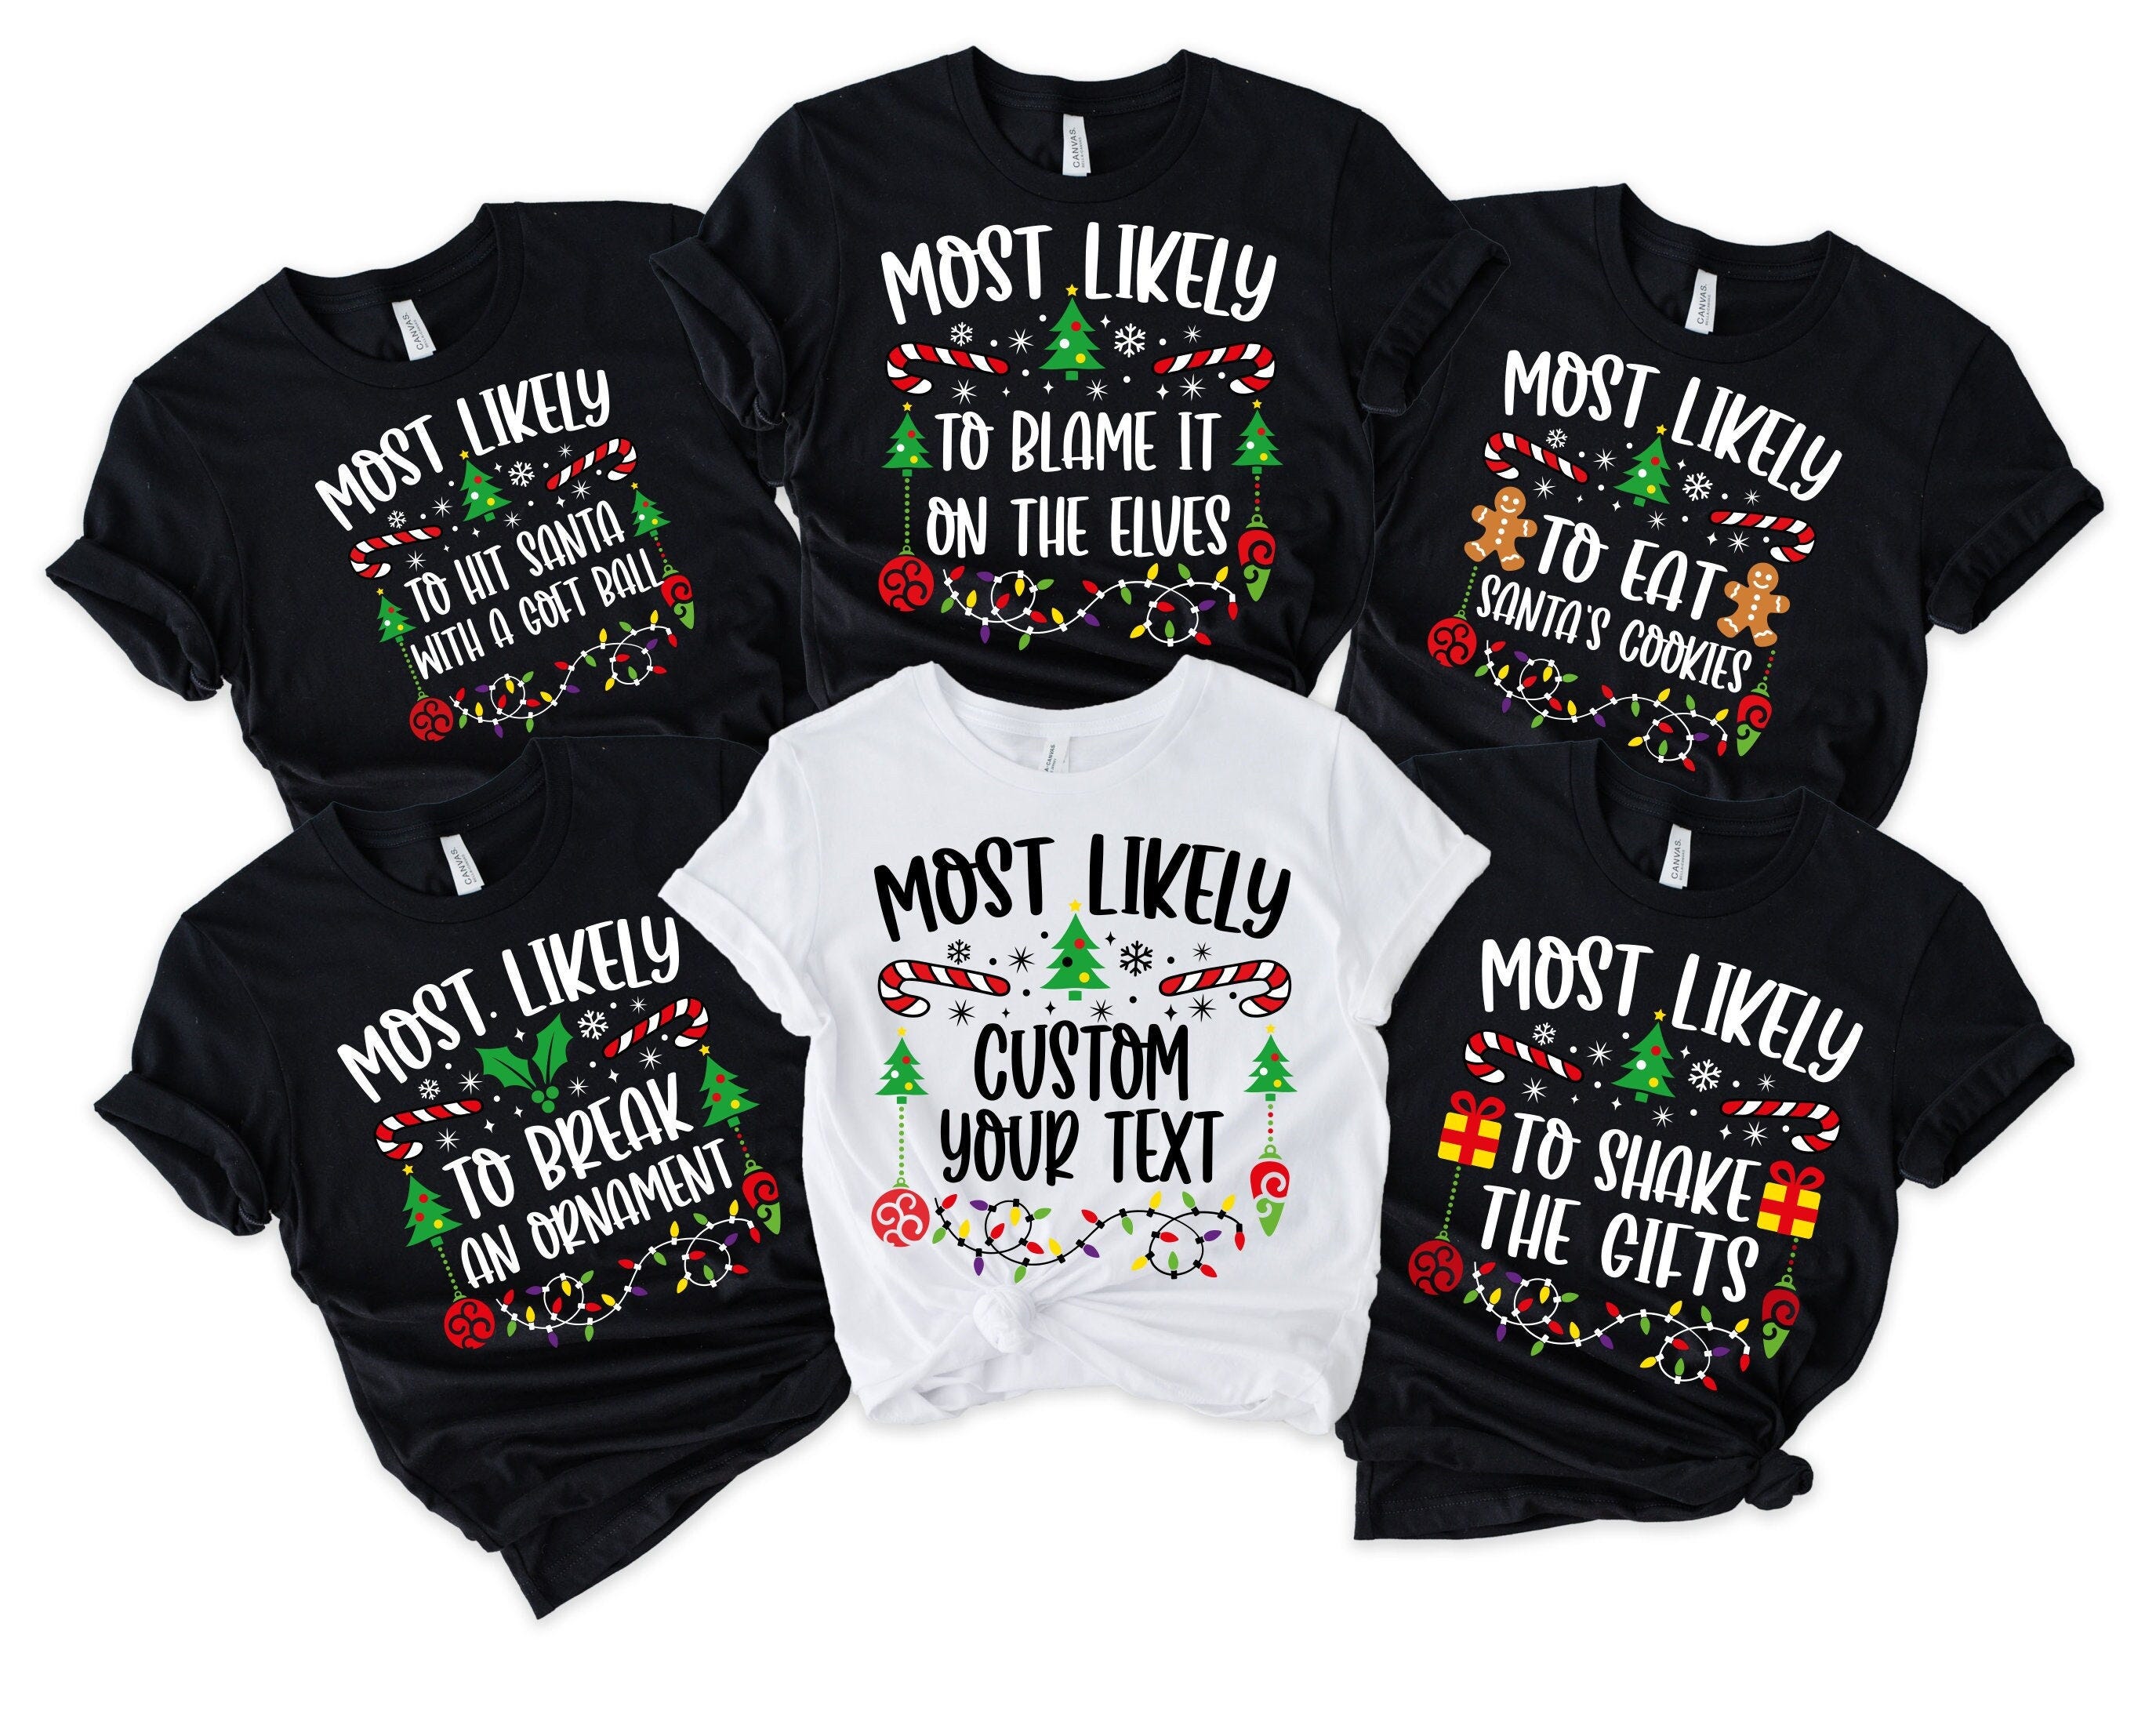 118 Quotes Most Likely to Christmas Shirt, Family Matching Christmas T-Shirts, Christmas Shirt, Funny Christmas Shirt, Family Pajamas